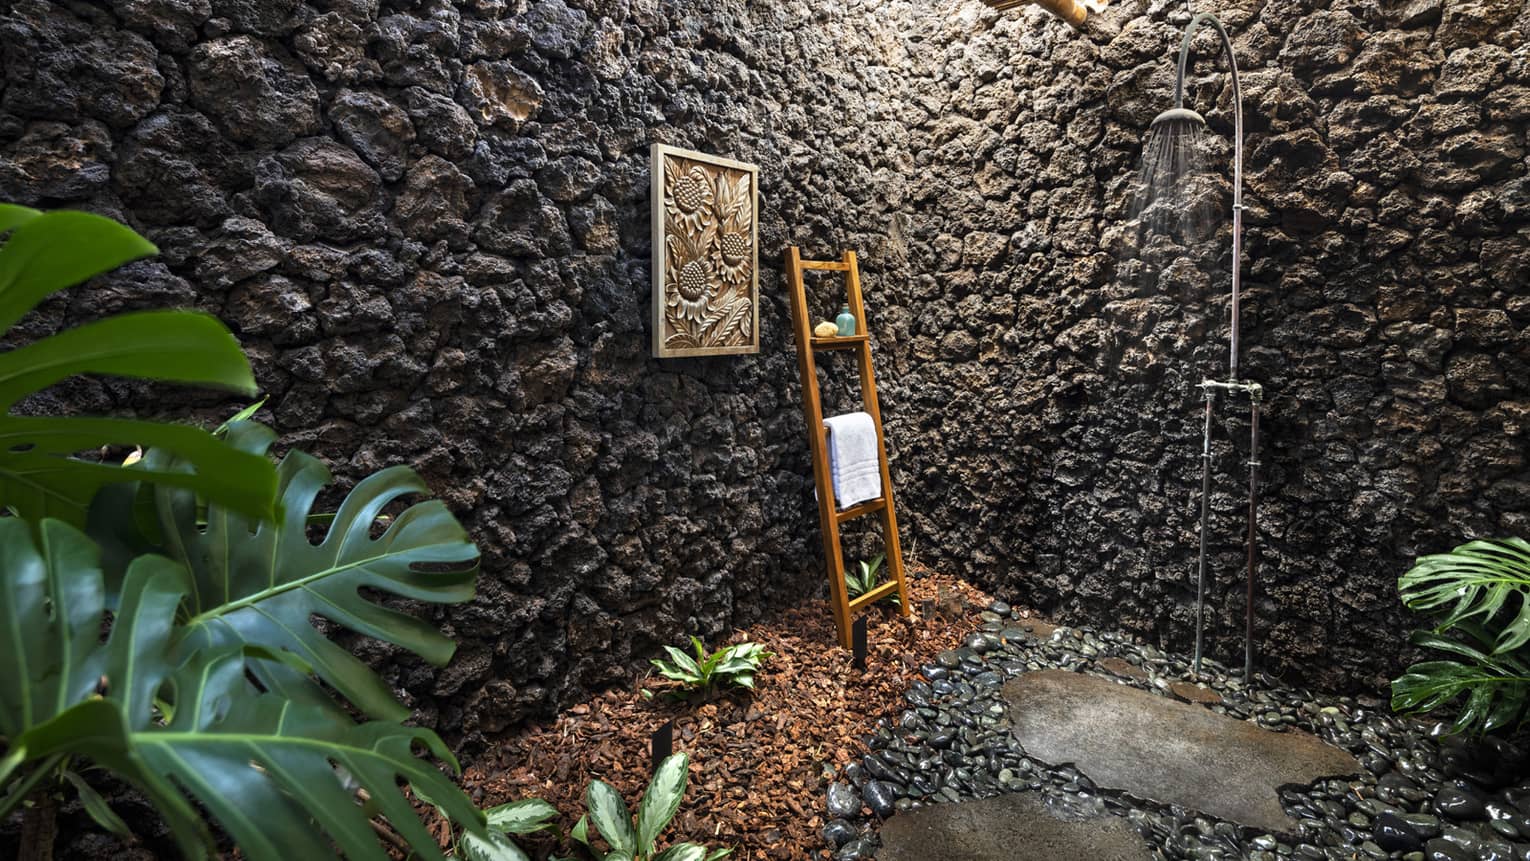 Outdoor shower with stone walls, teak ladder holding towel, greenery